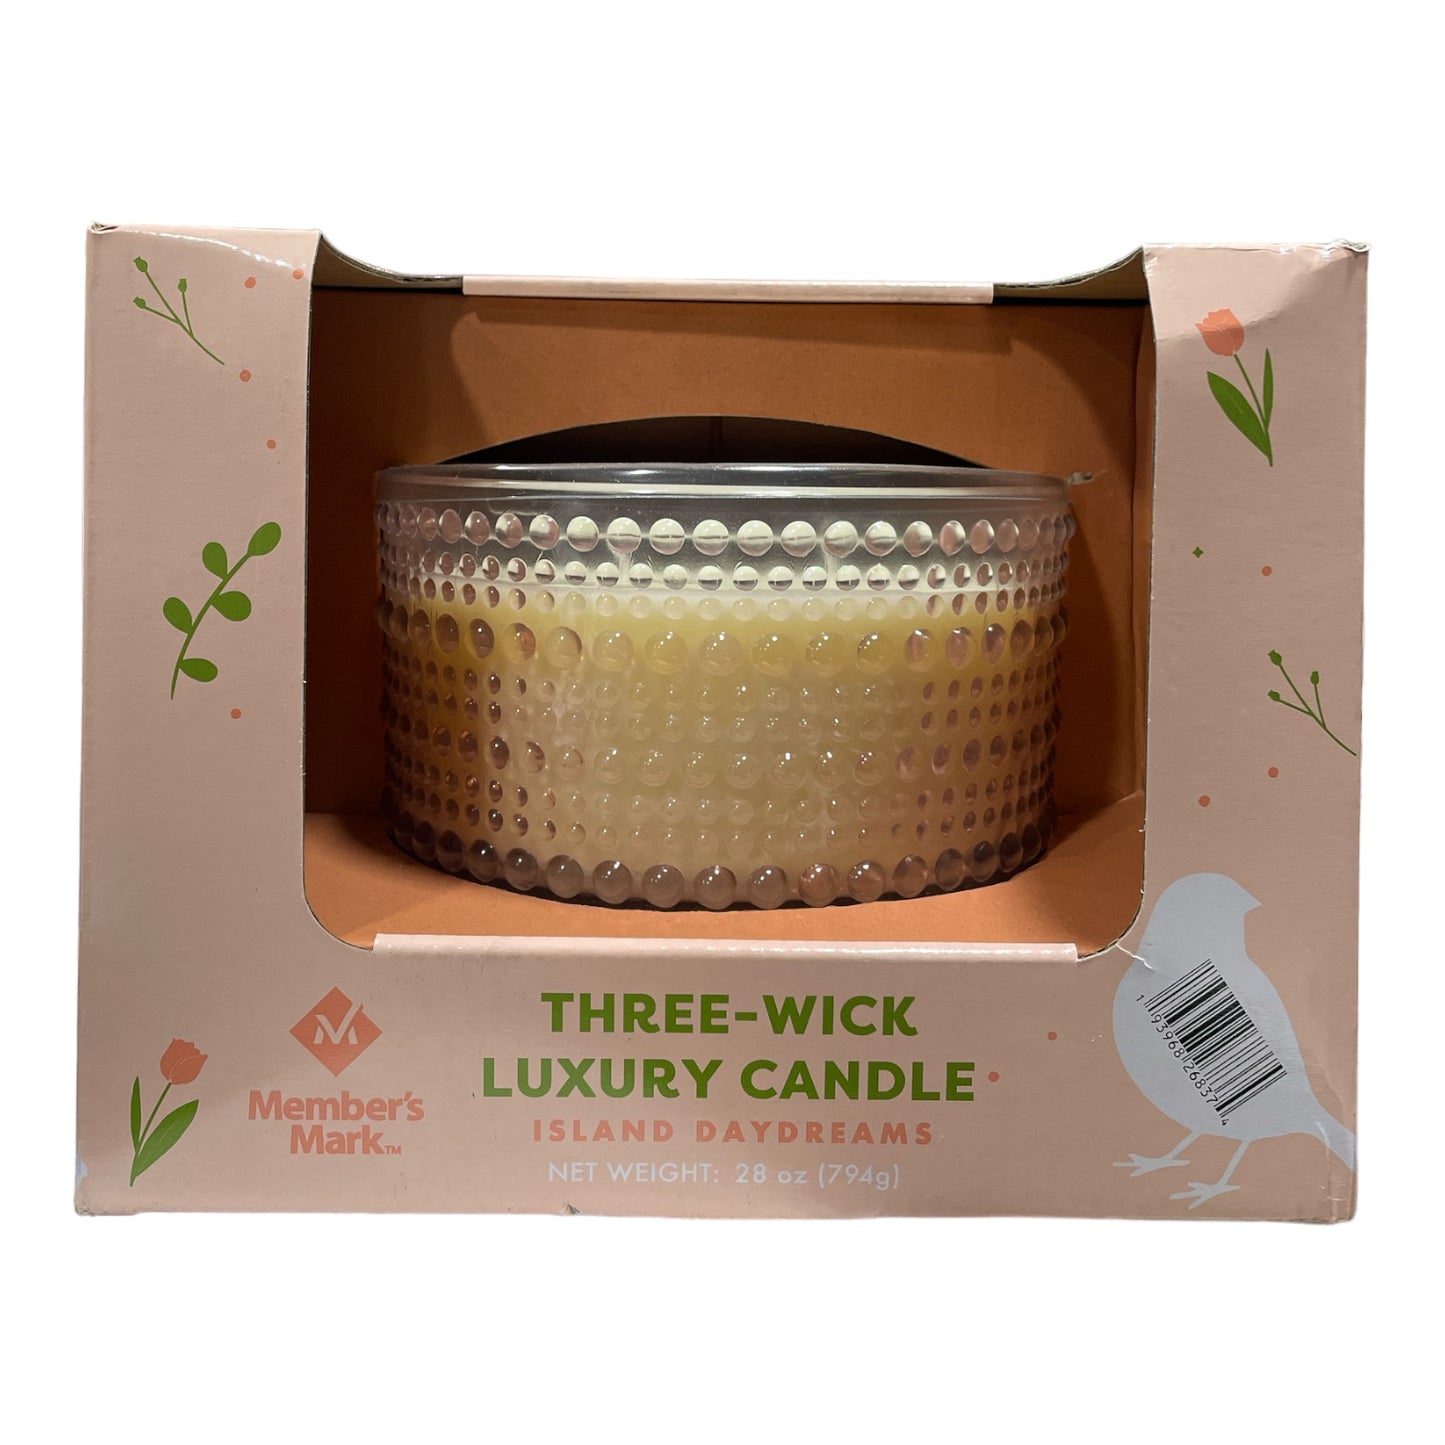 Member's Mark Three-Wick Luxury Scented Candle in Glass Container, 28oz